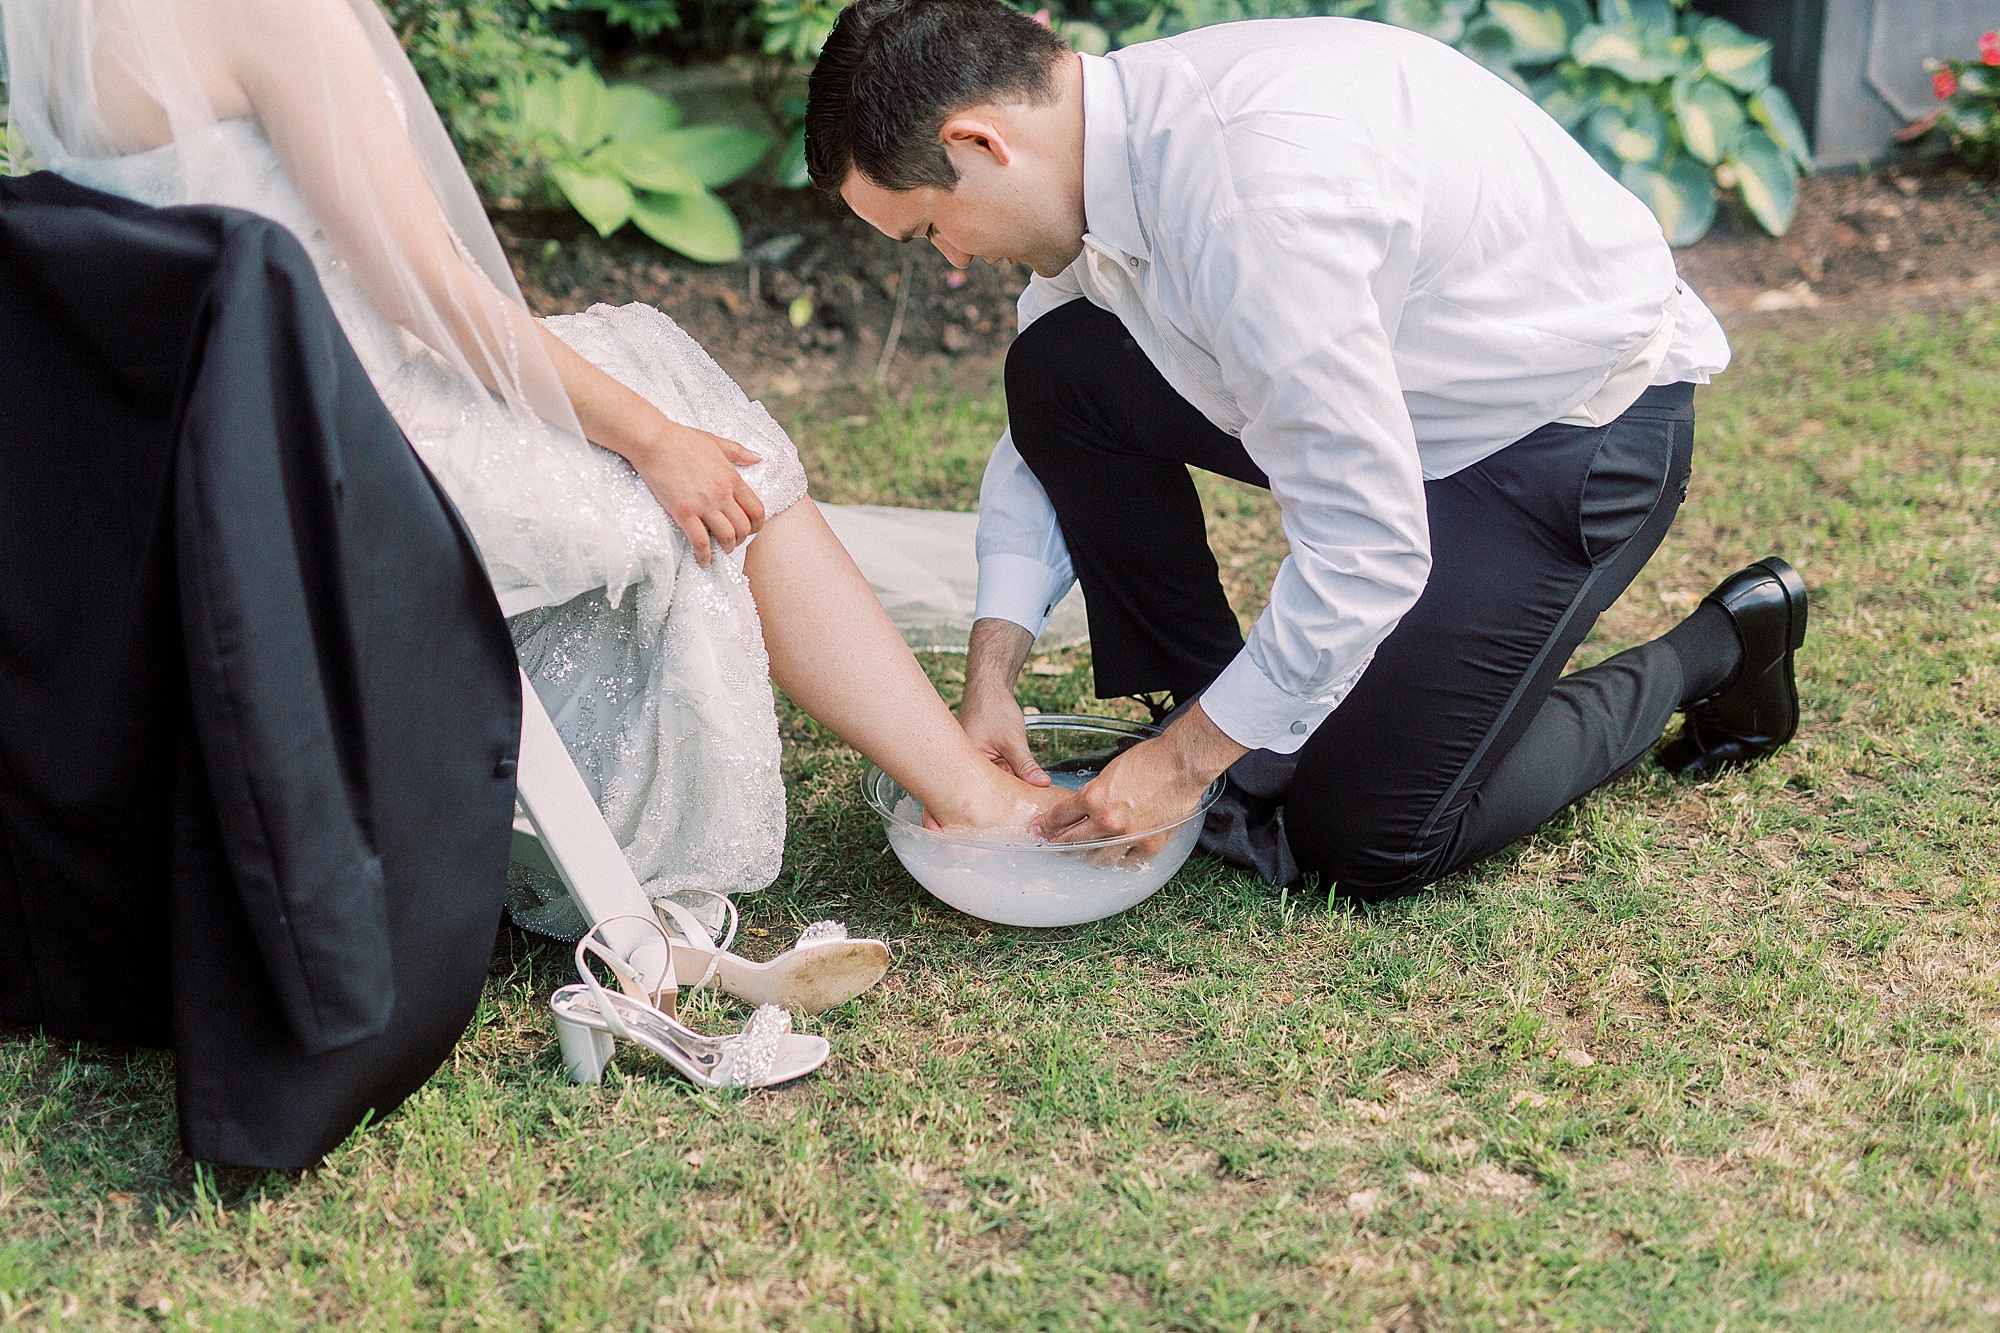 groom washes bride's feet before wedding ceremony